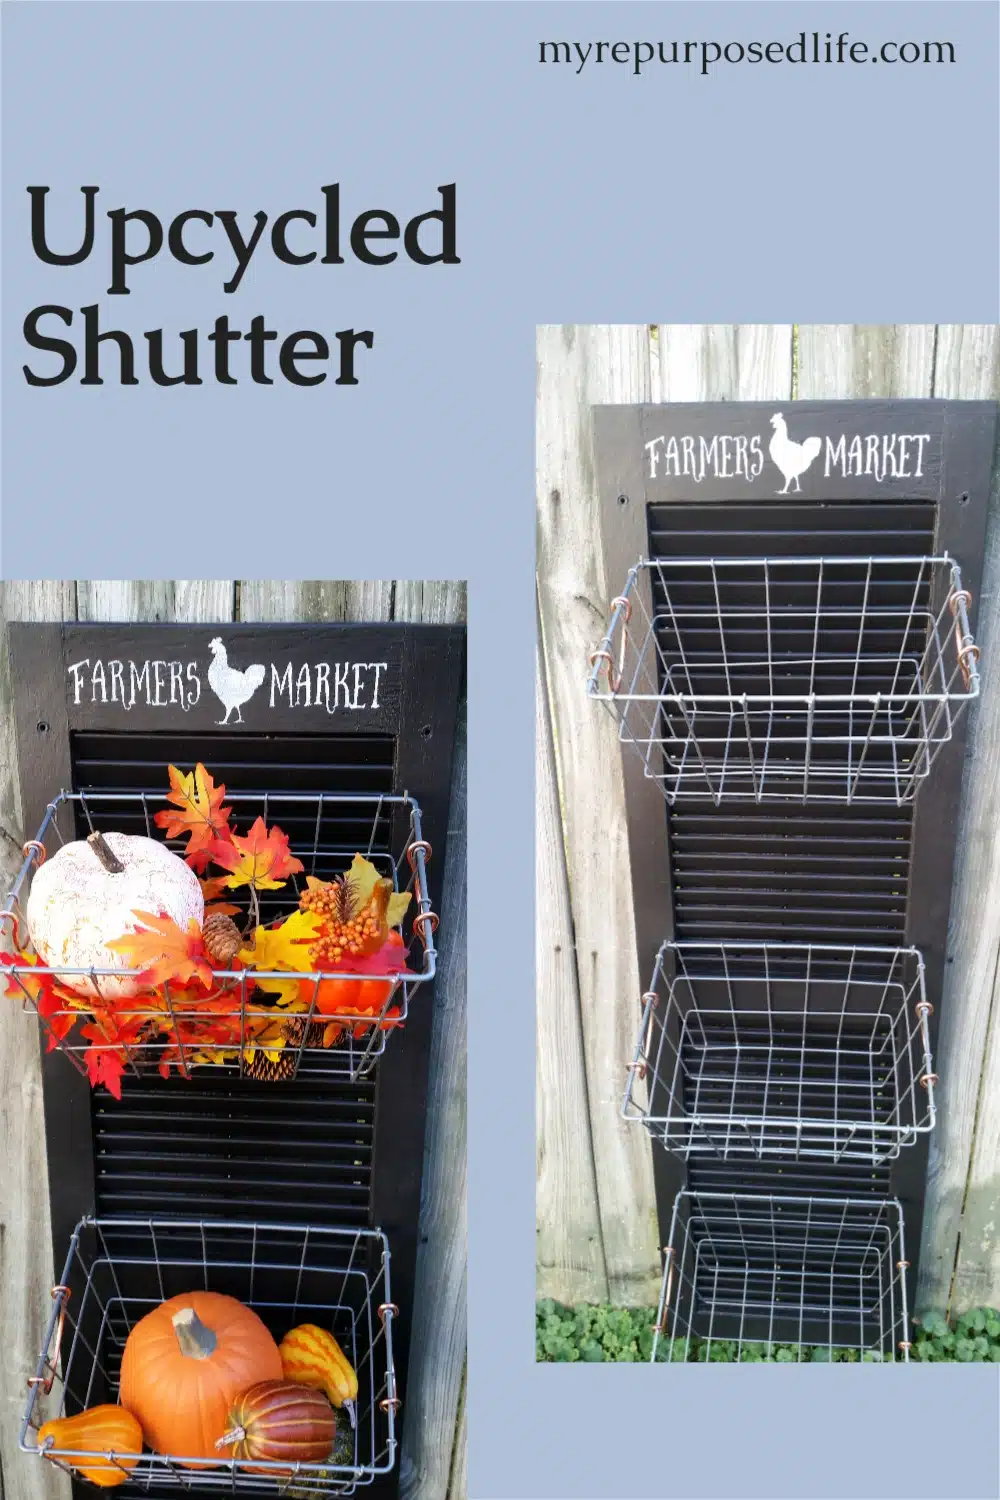 How to repurpose an old shutter into a hanging produce bin by adding some hooks and wire baskets. Lean against the wall or hang it to keep produce handy. #MyRepurposedLife #repurposed #upcycle #shutter #produce #bin #organizer via @repurposedlife